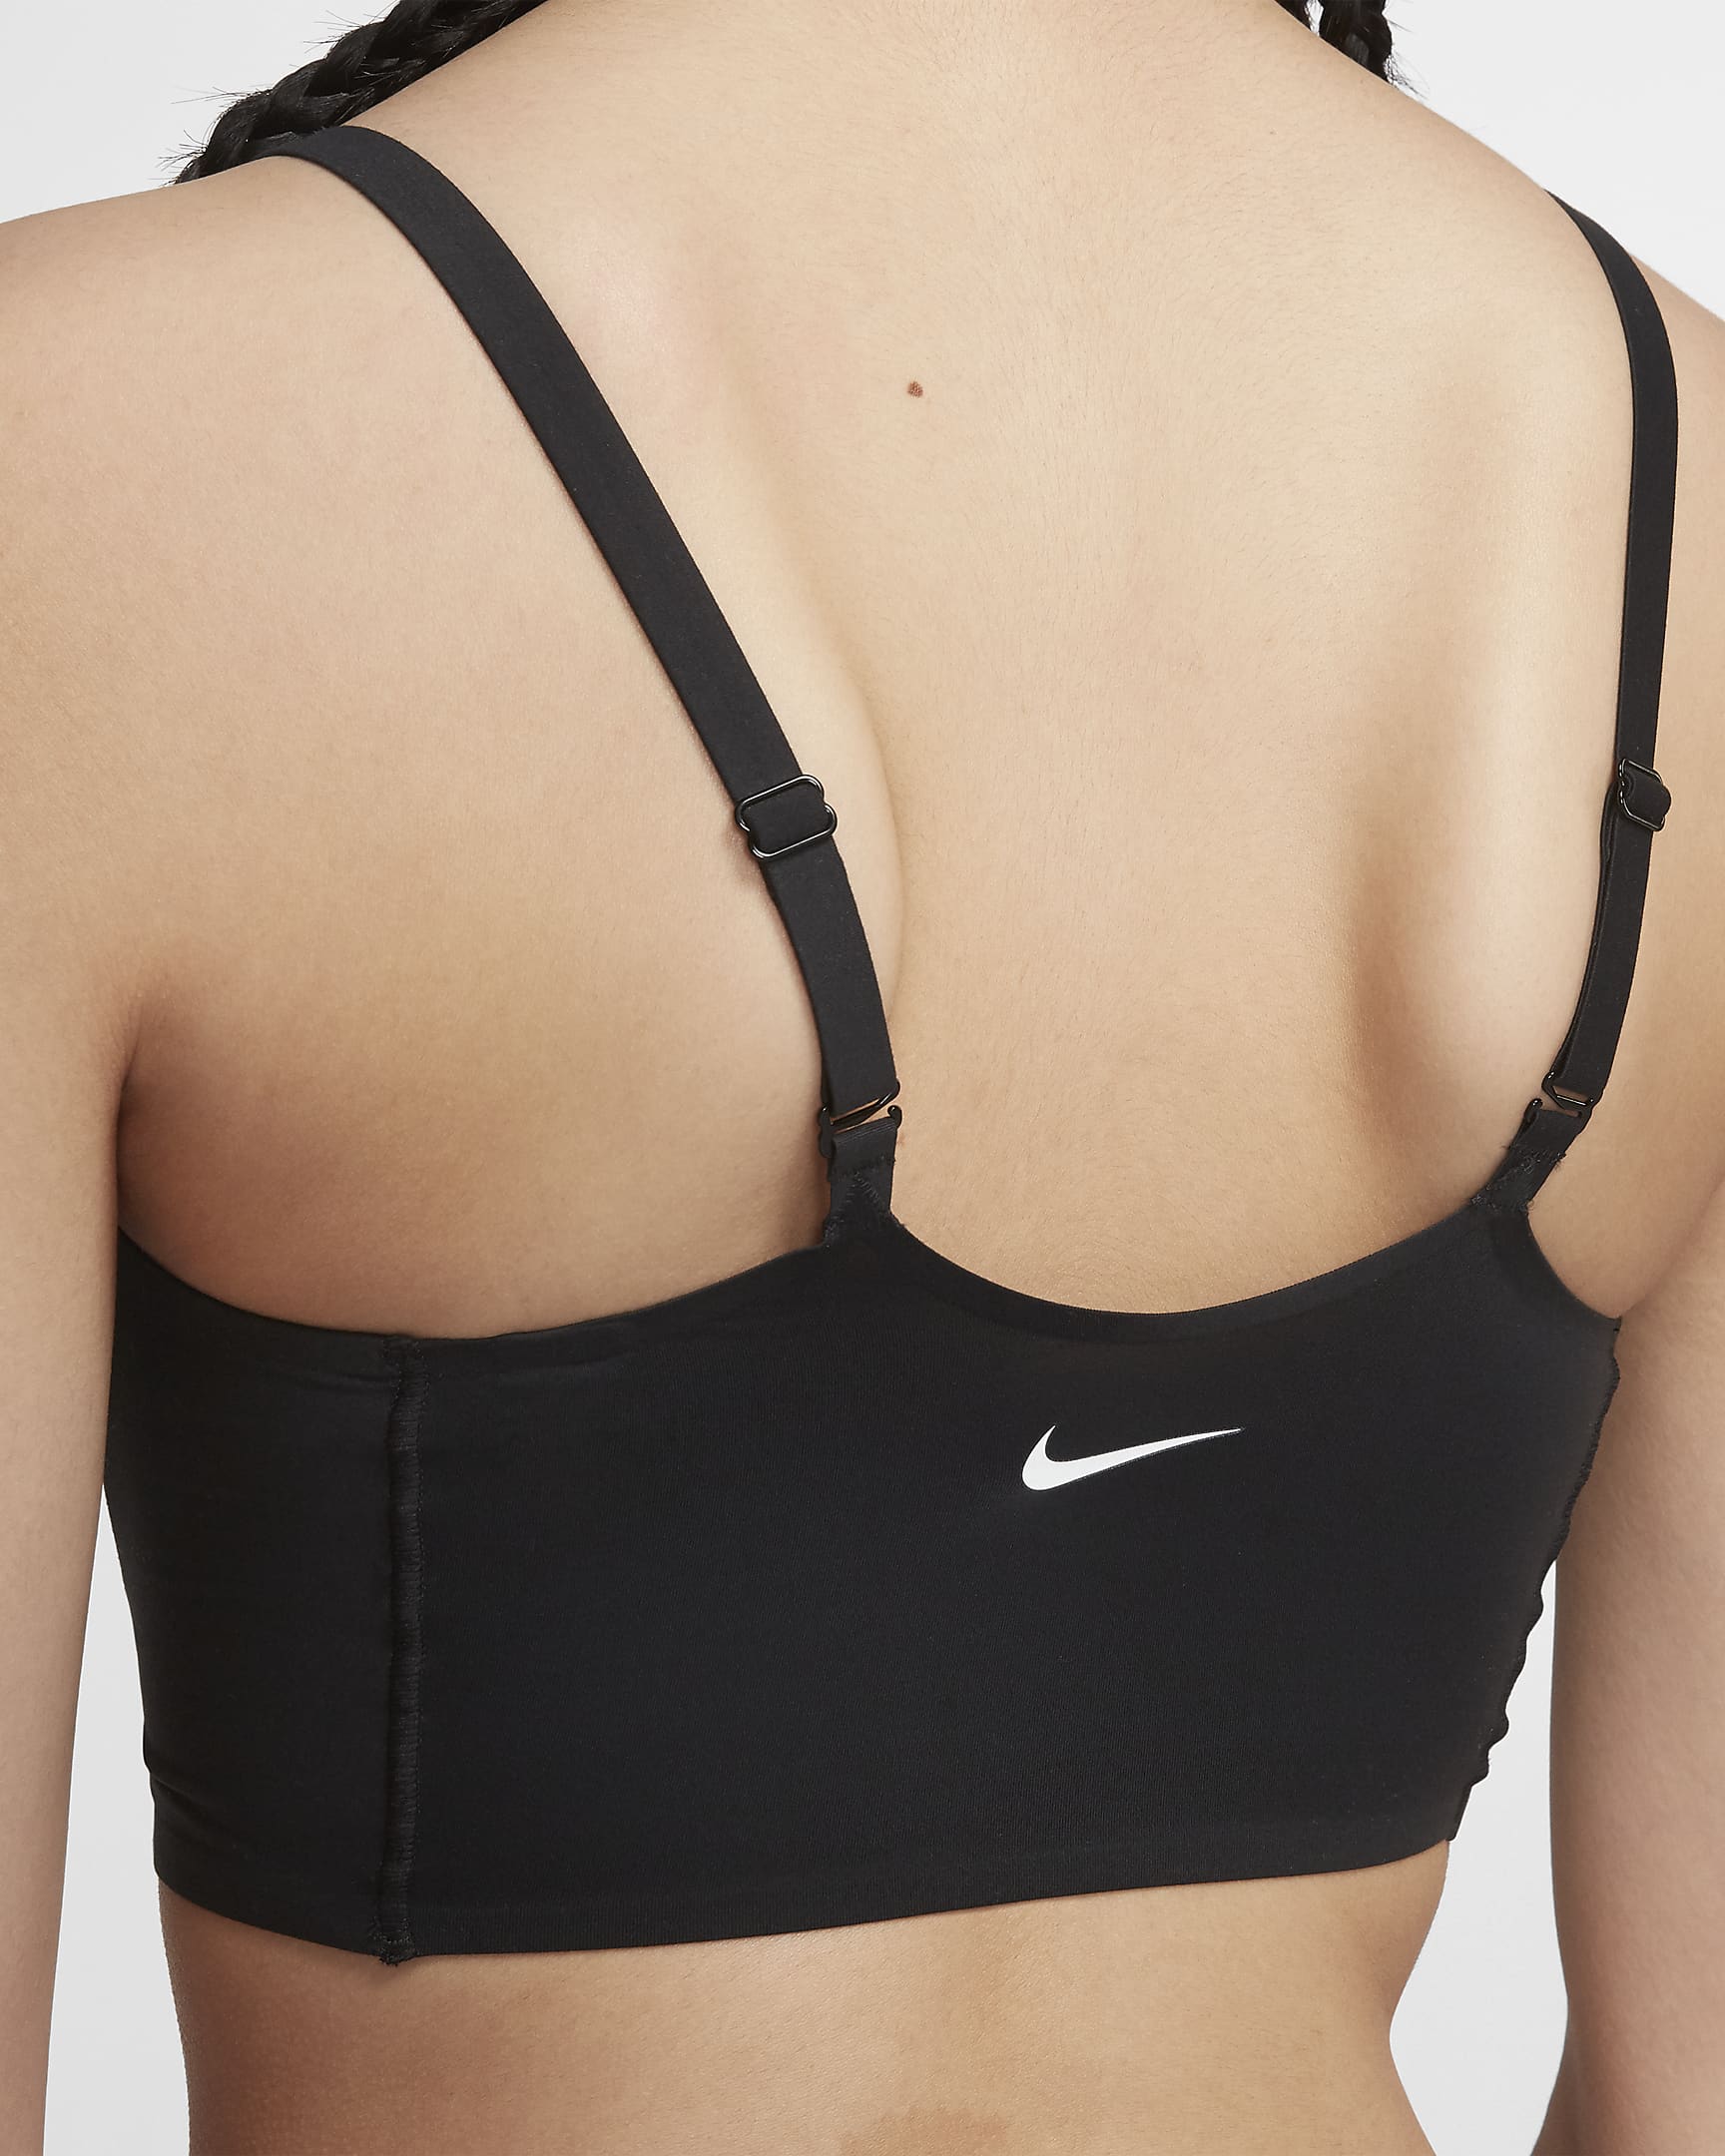 Nike Indy Luxe Women's Light-Support Padded Convertible Sports Bra - Black/White